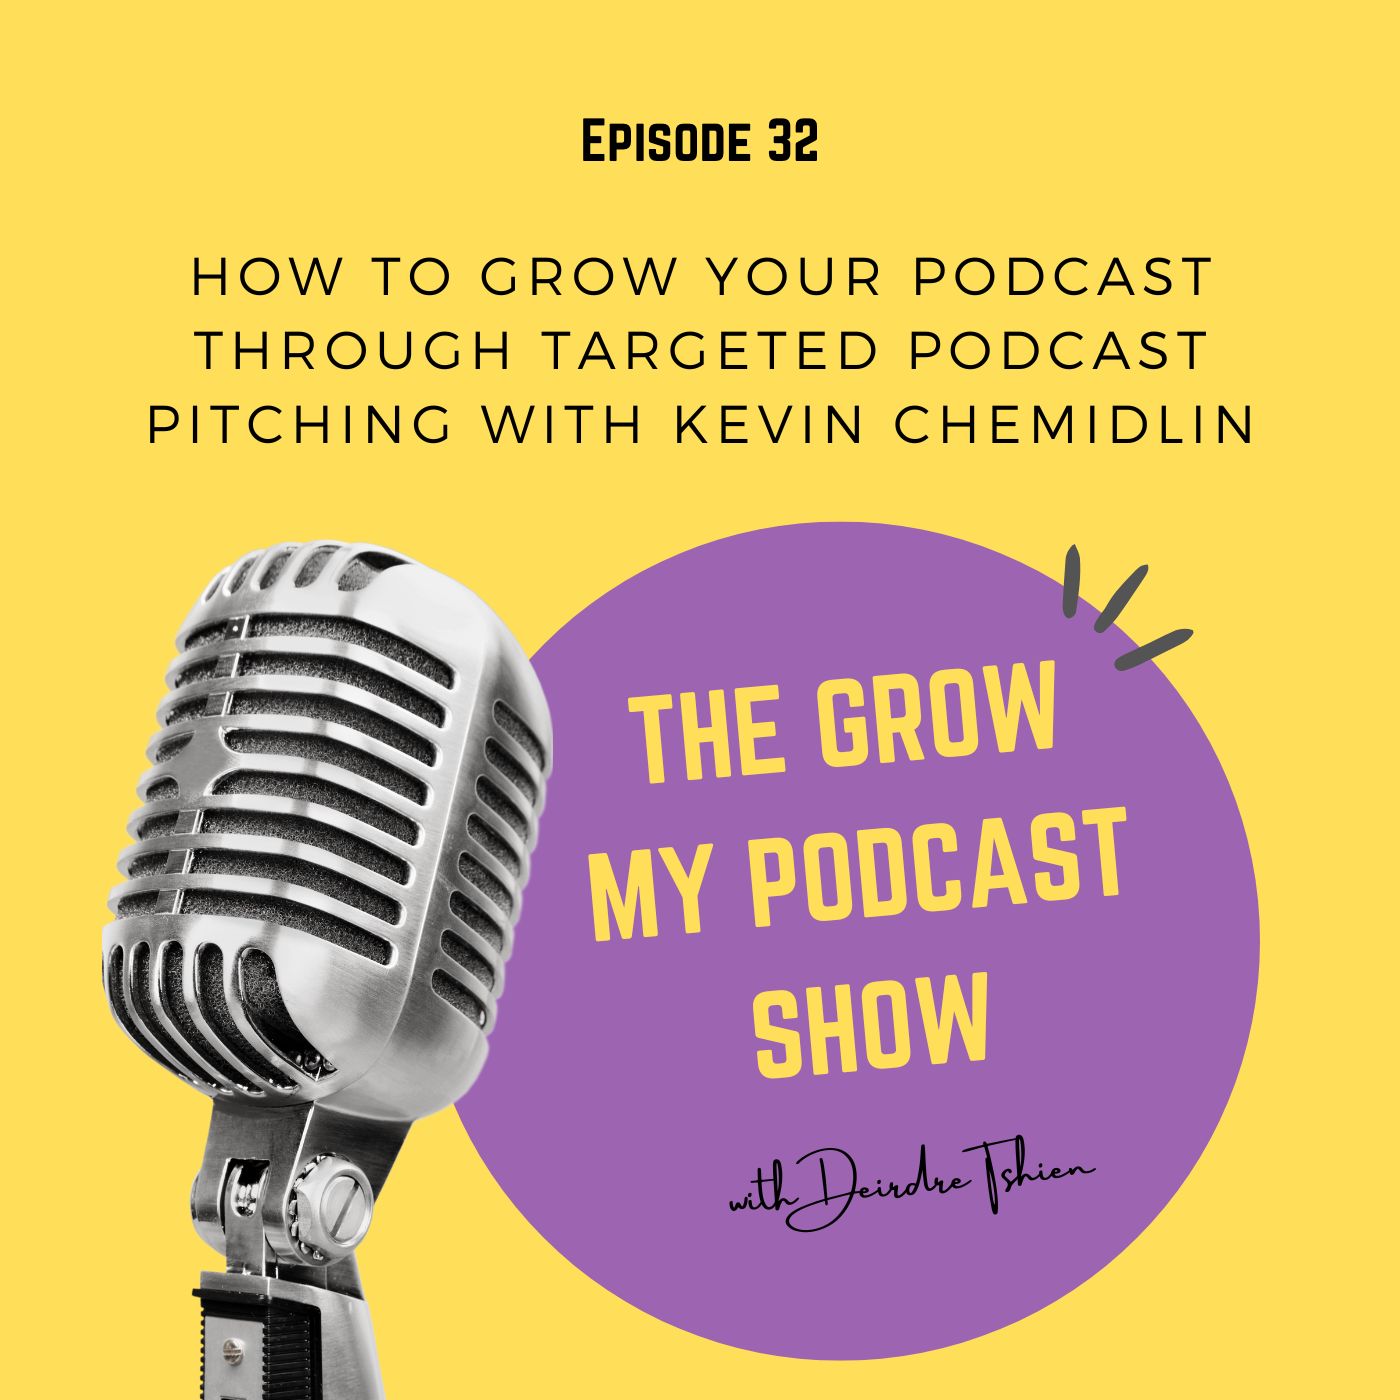 32. How to Grow Your Podcast Through Targeted Podcast Pitching with Kevin Chemidlin Image